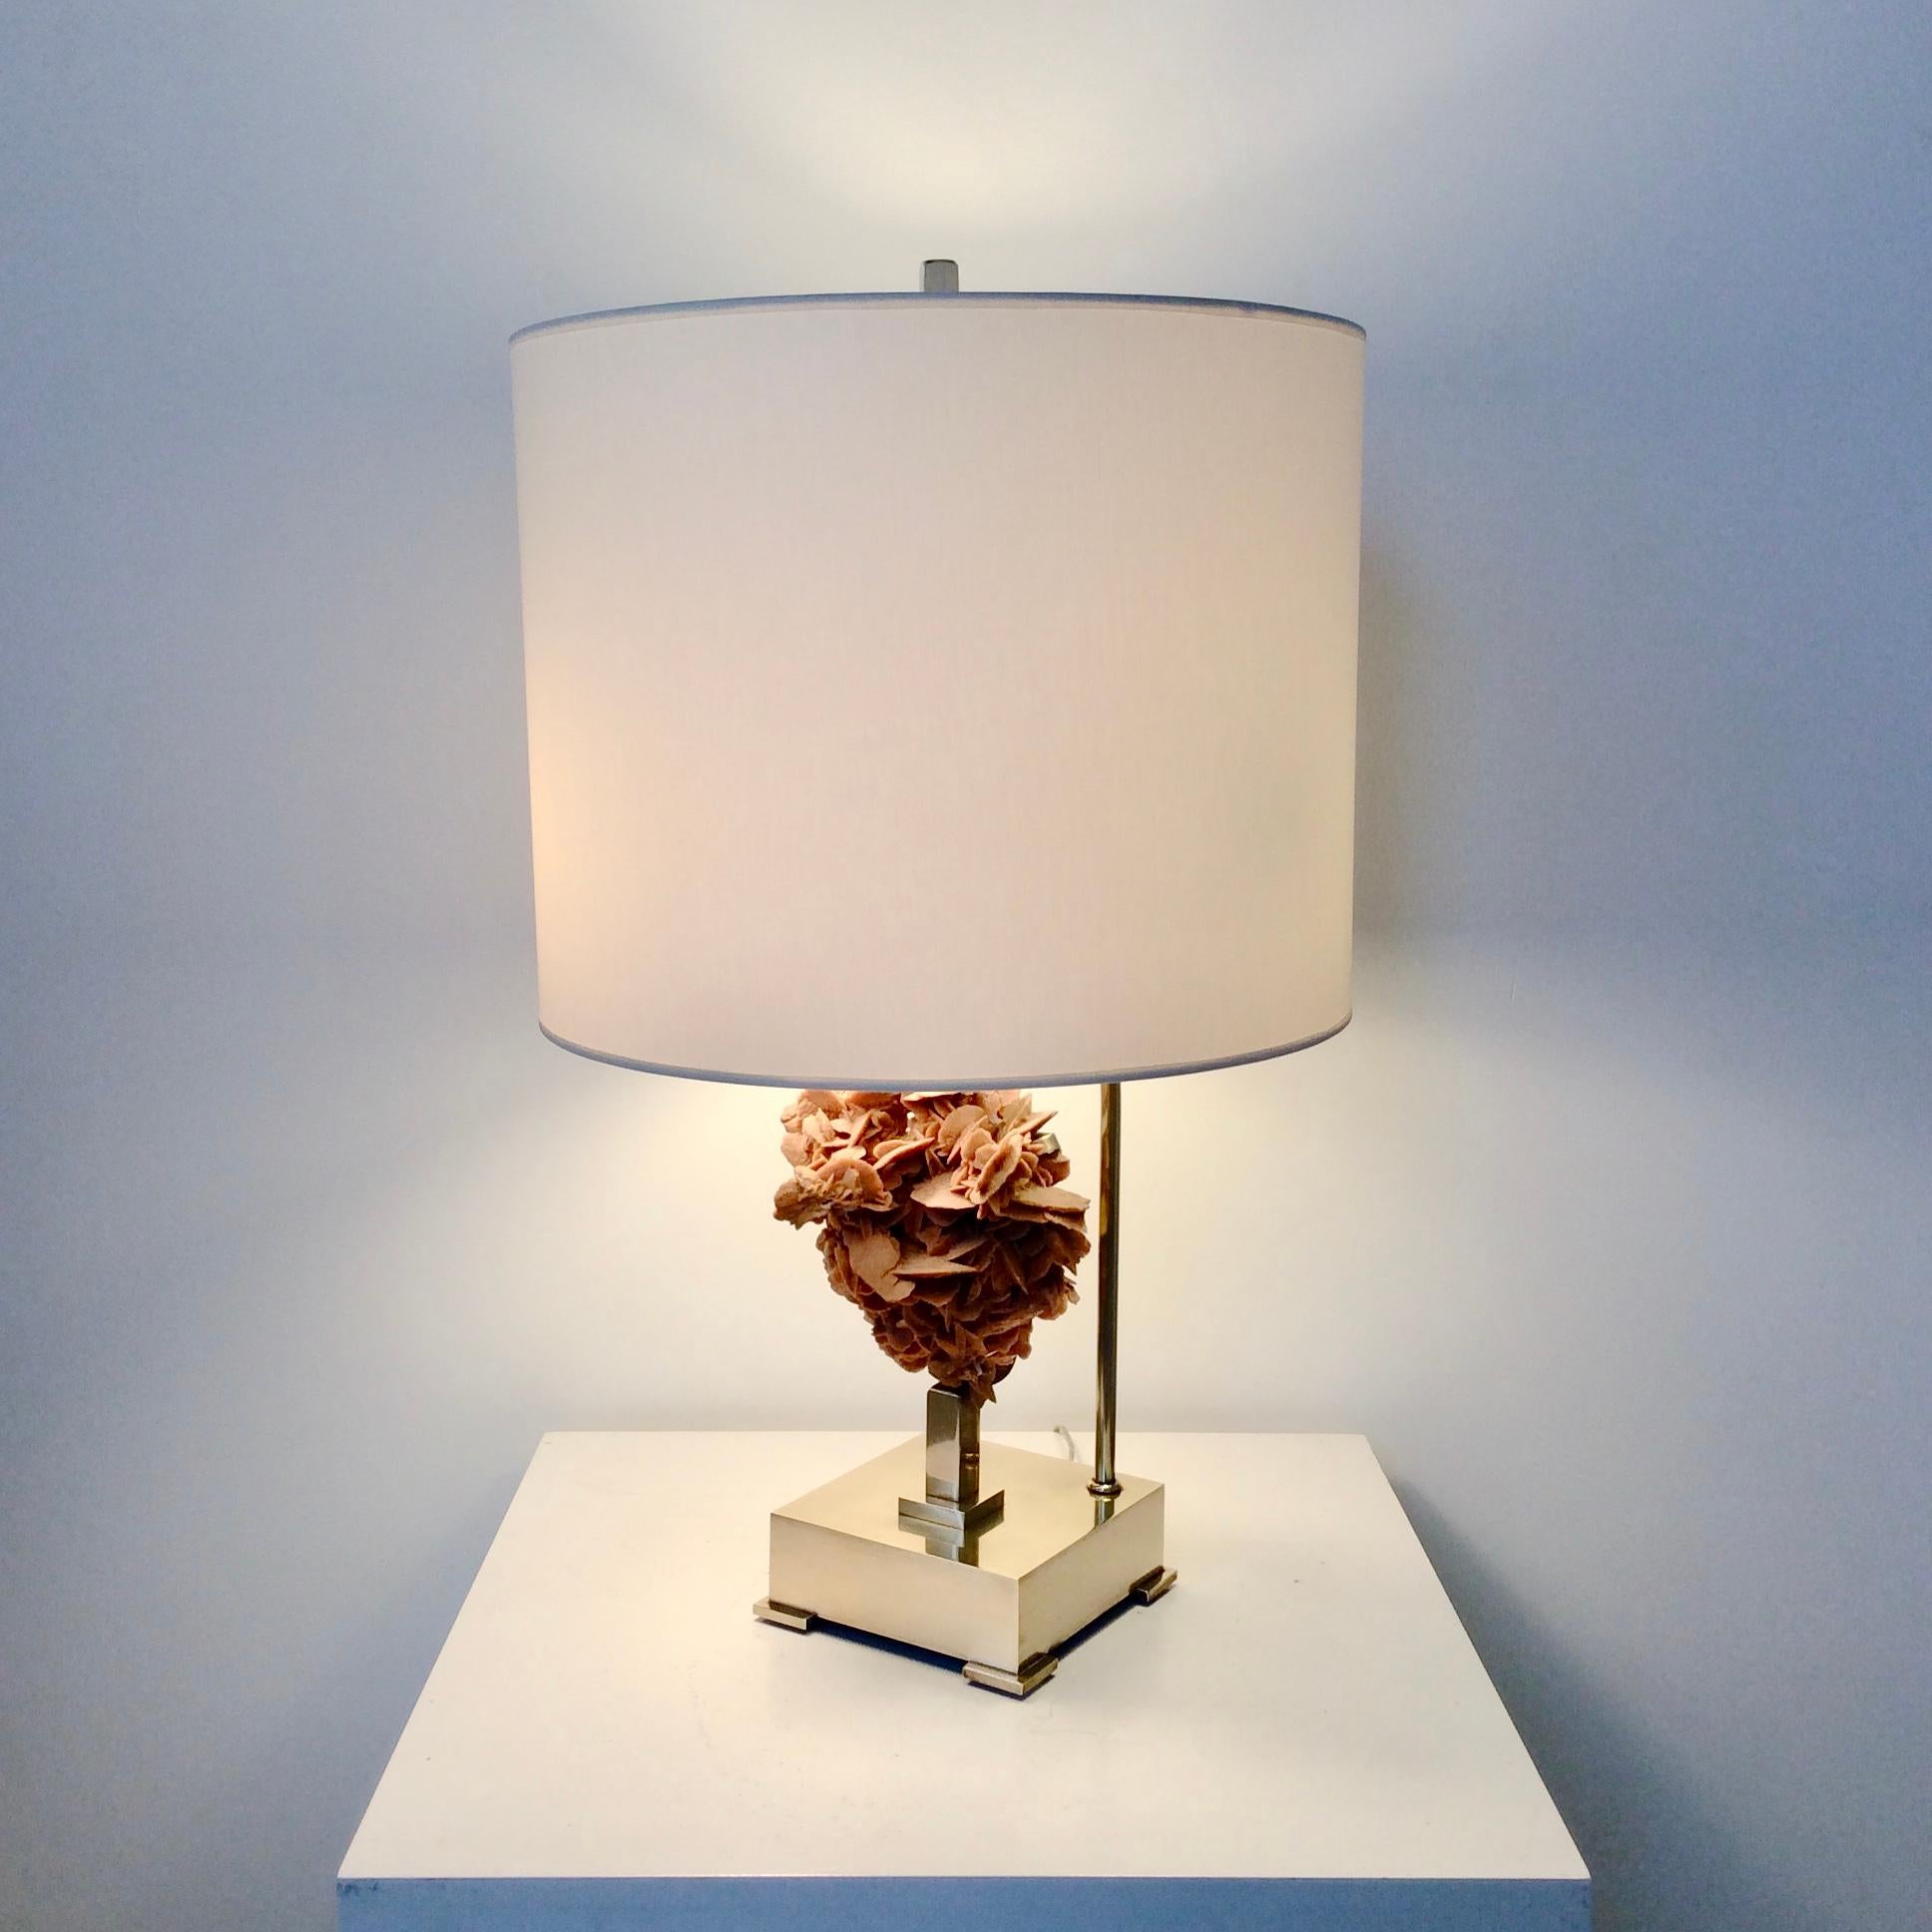 Table Lamp, Desert Rose and Brass, by Willy Daro, circa 1970, Belgium (Poliert)